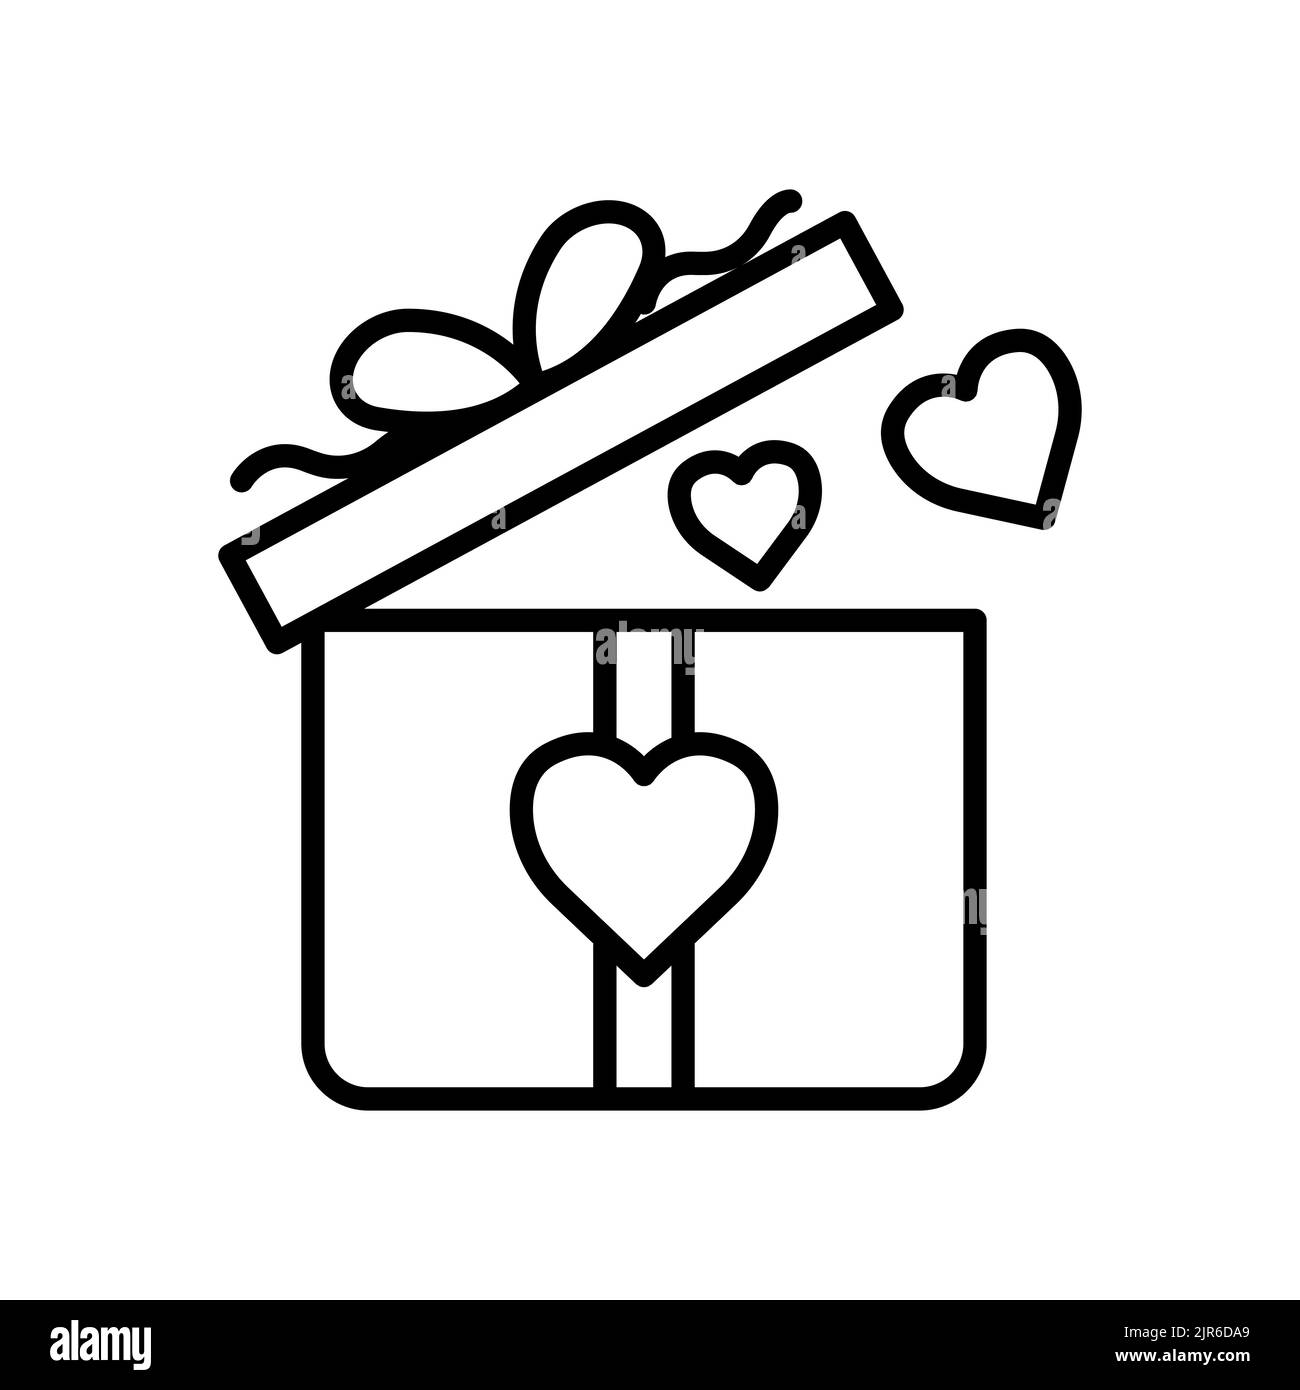 Open gift box icon . icon related to affection, love, charity. Line icon style. Simple design editable Stock Vector